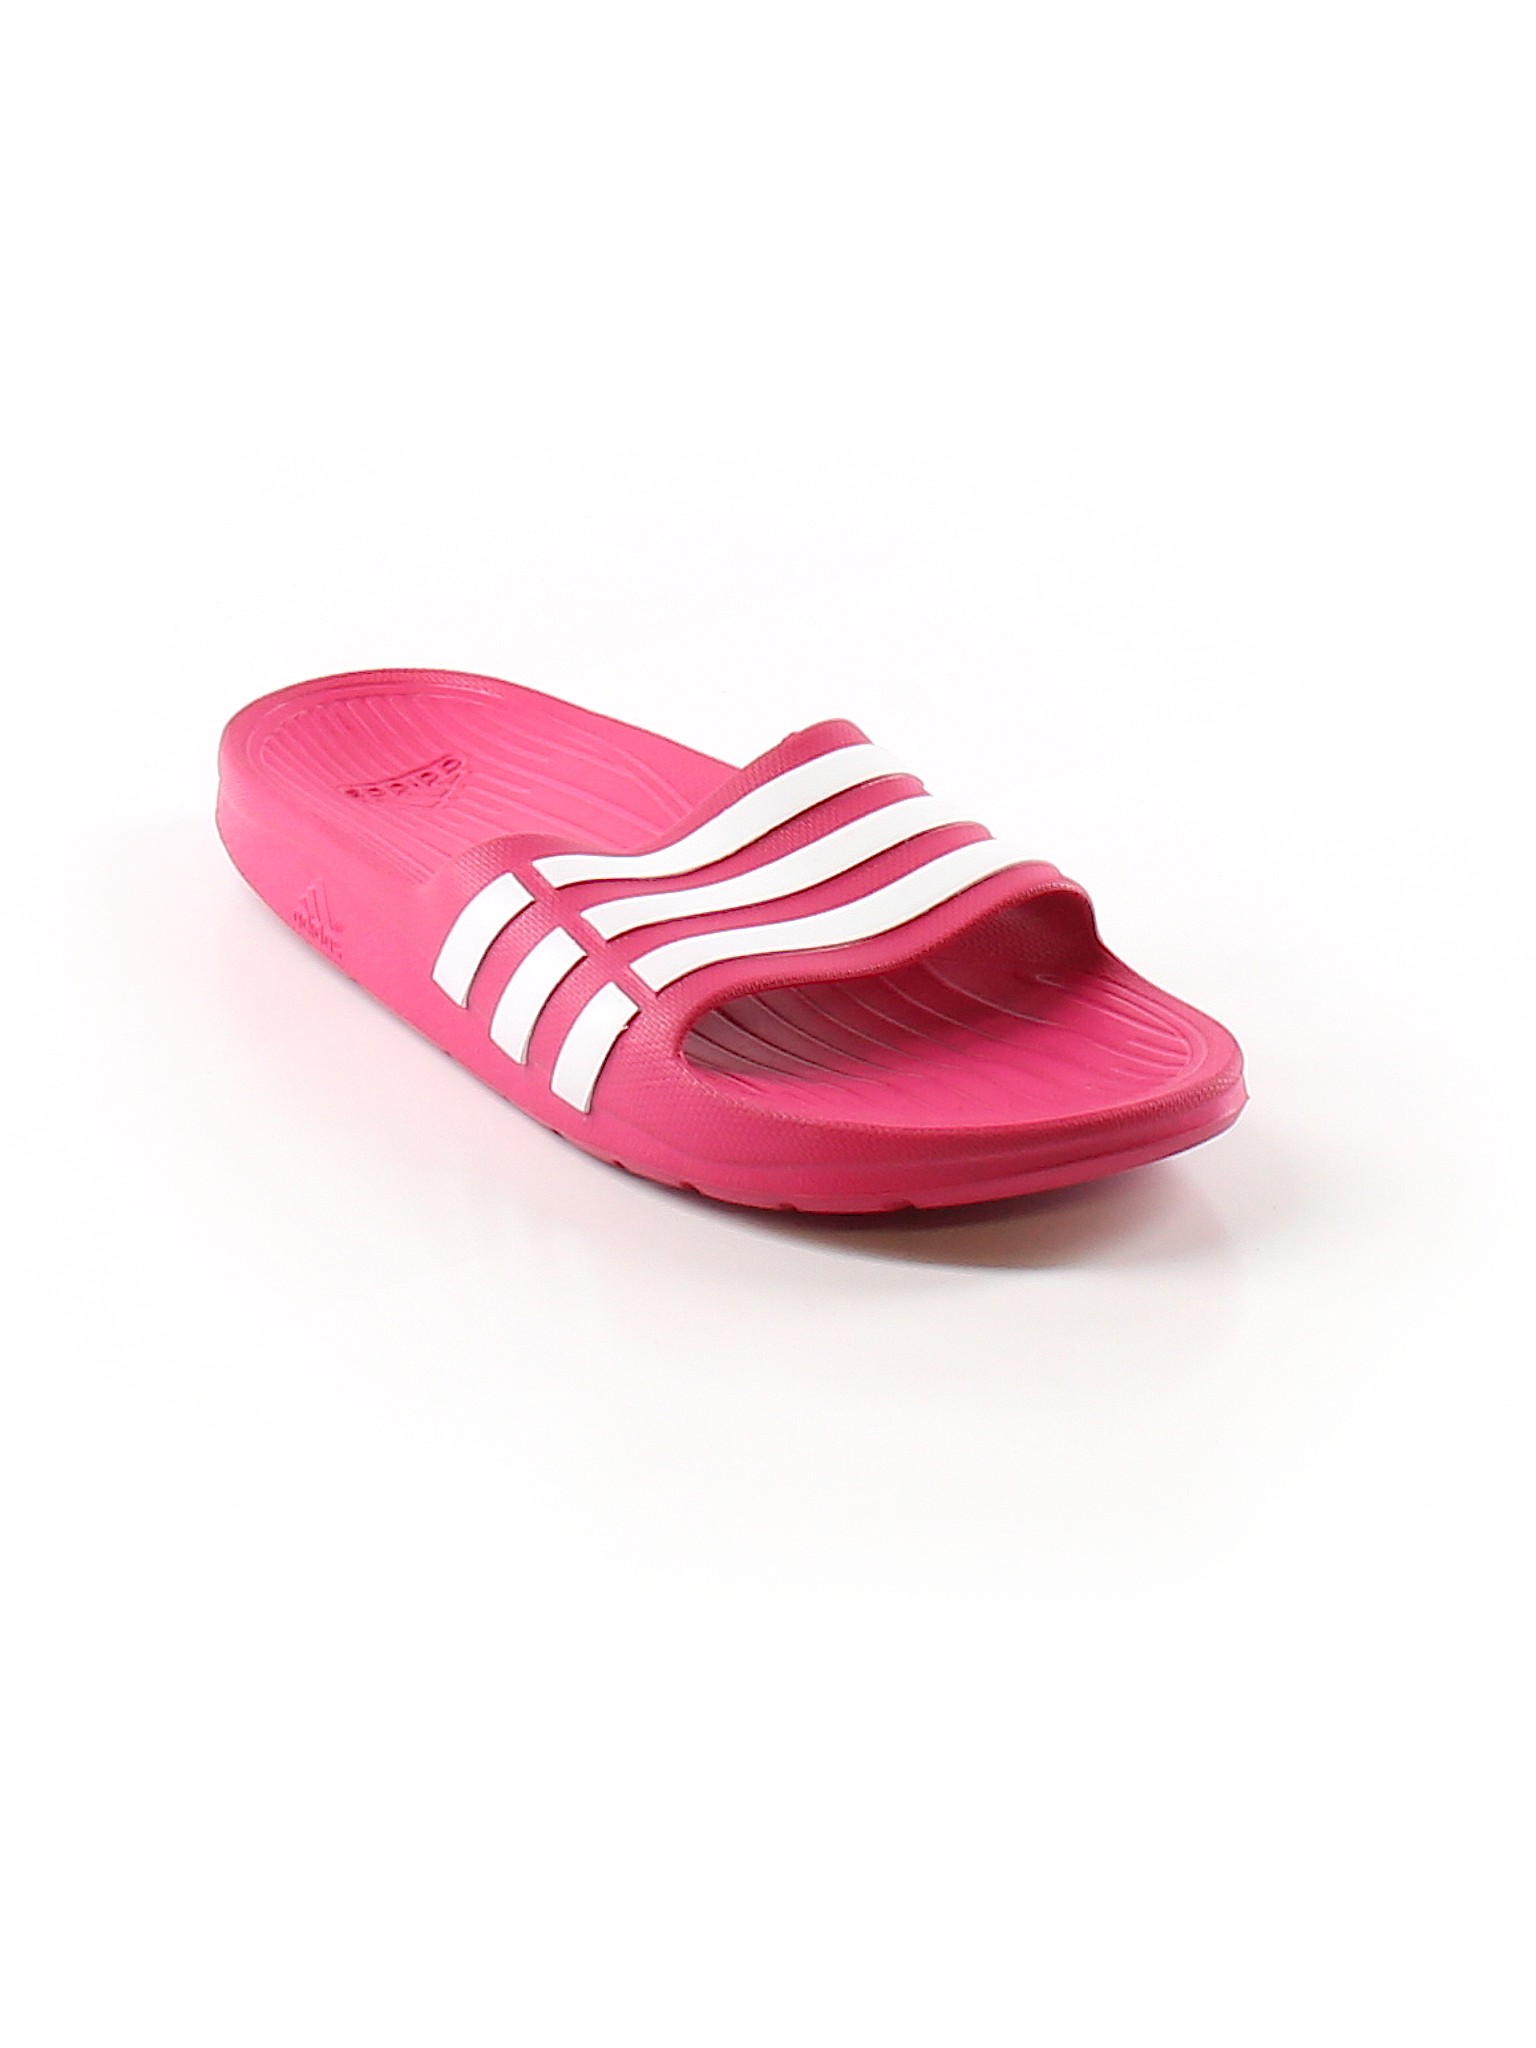 pink sandals size 6